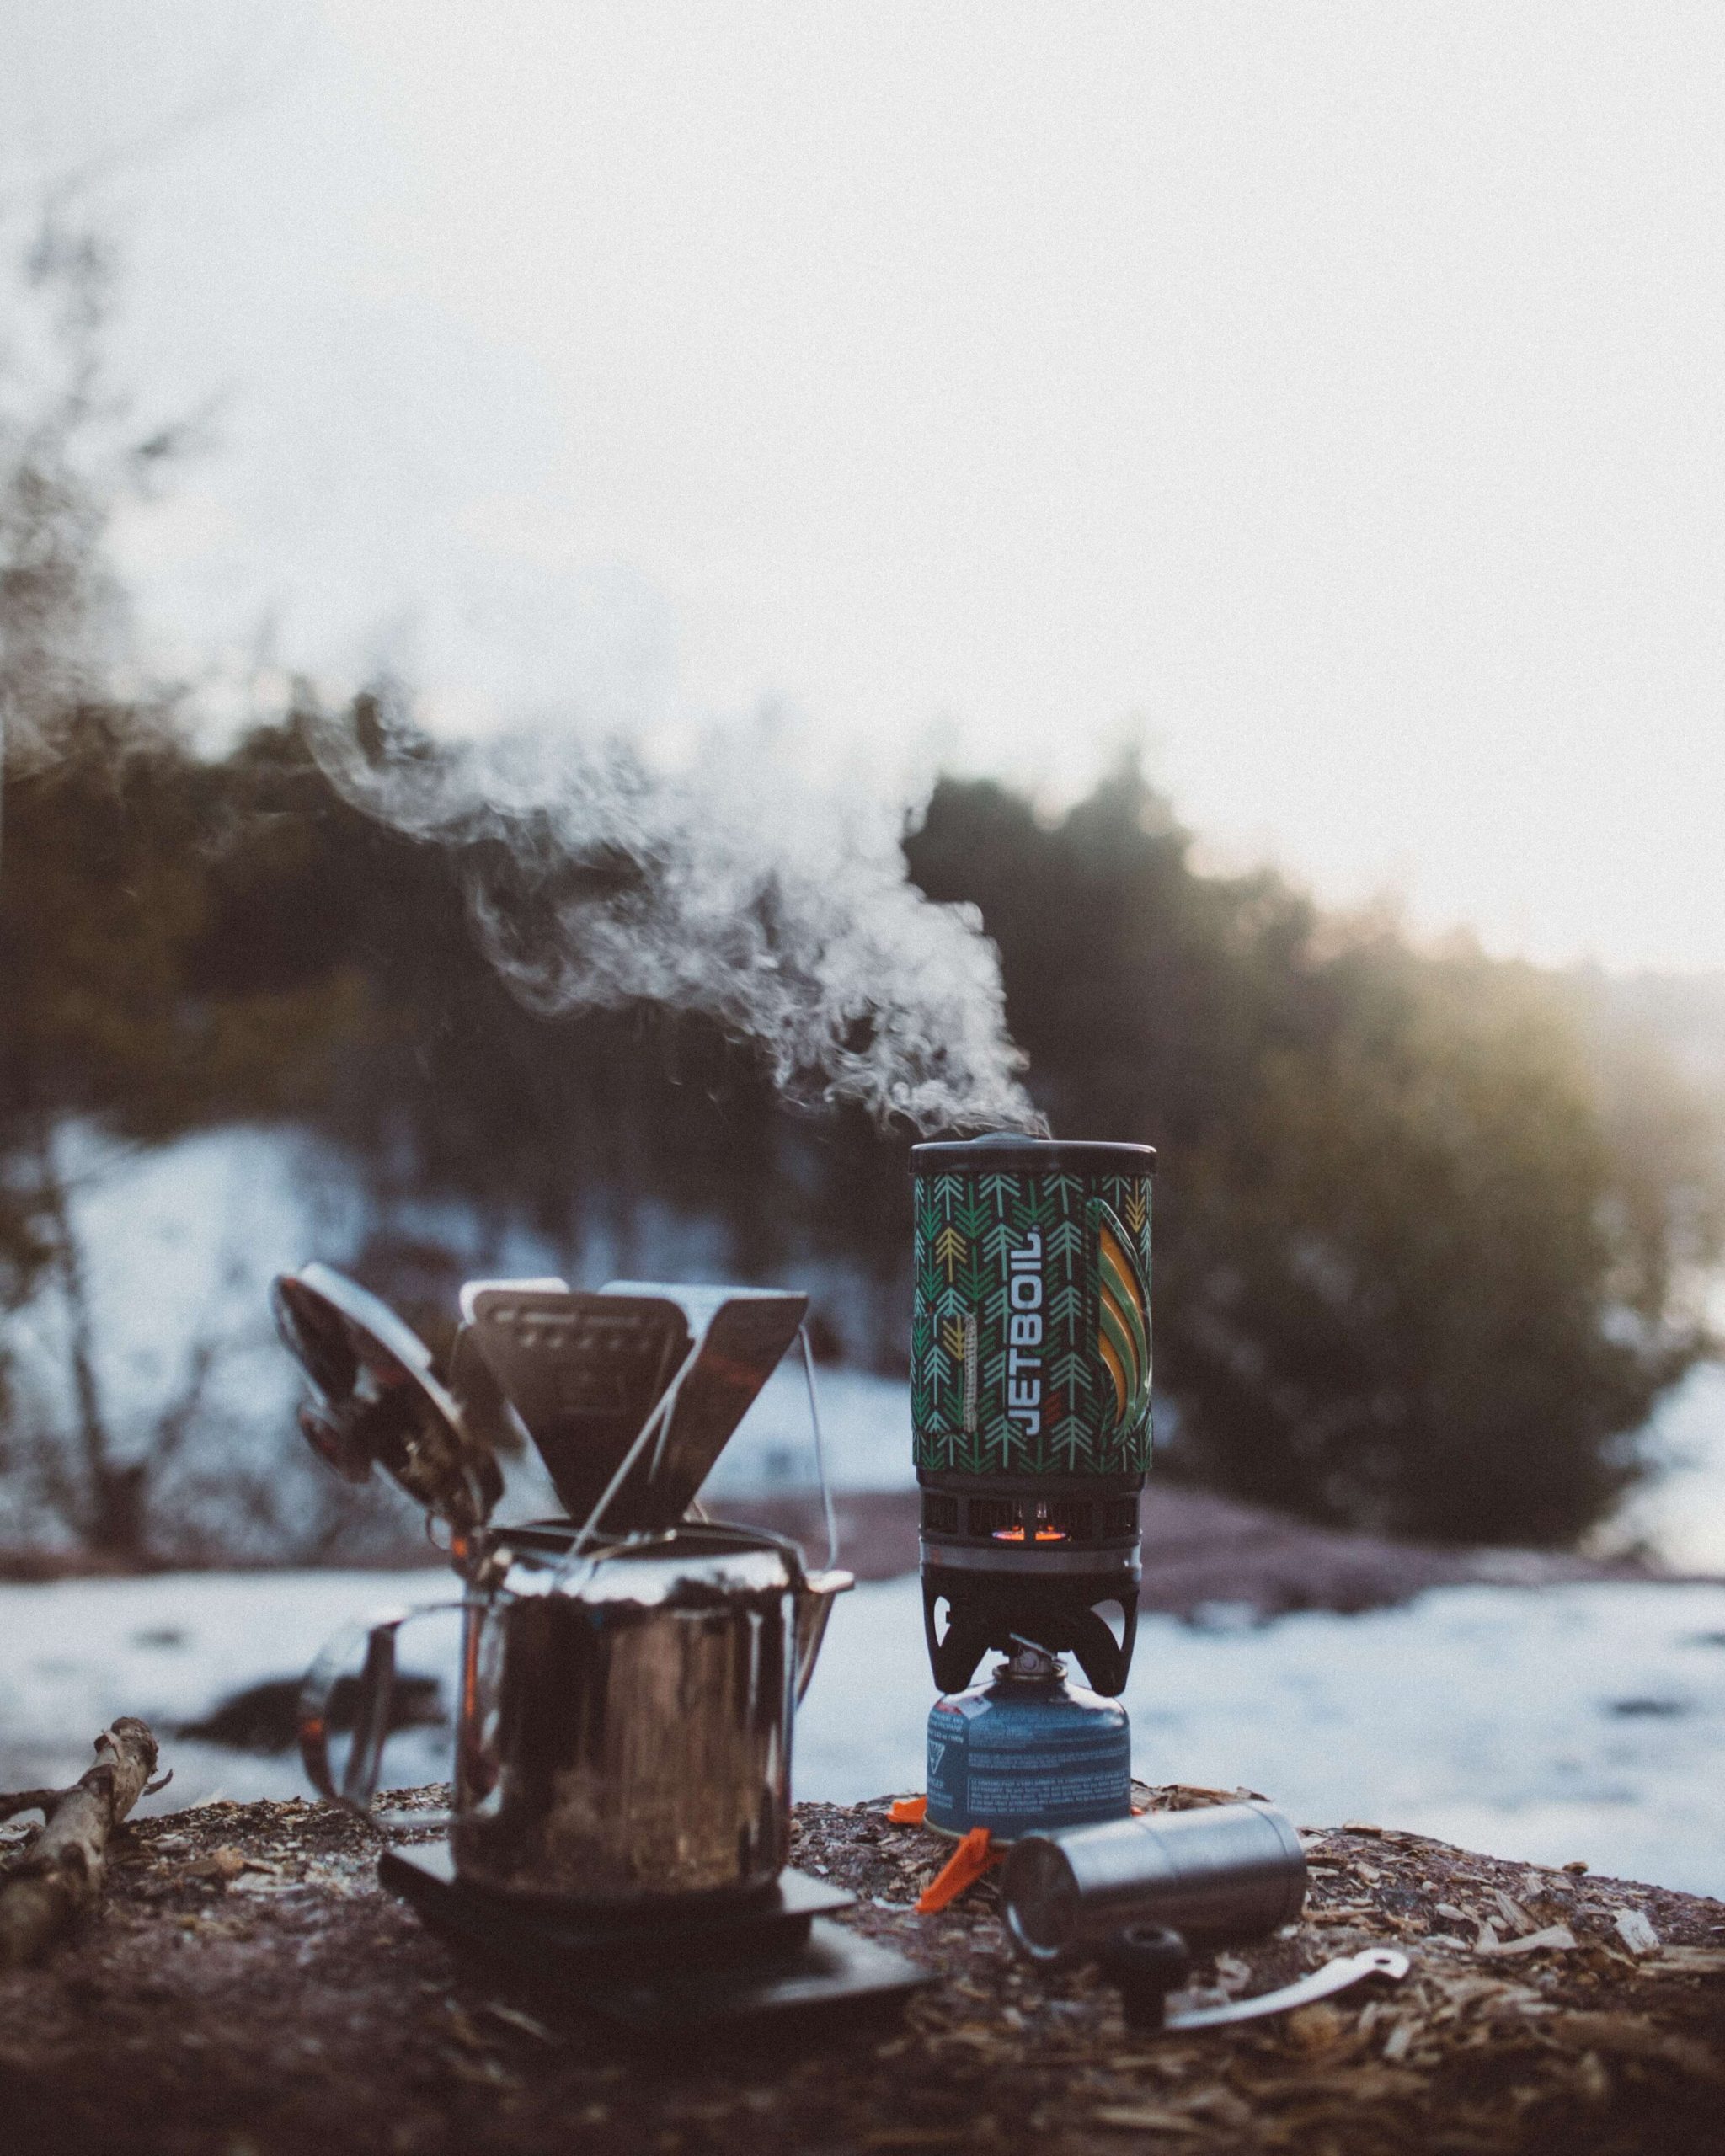 Shown In Photo:  Jetboil Flash Stove .